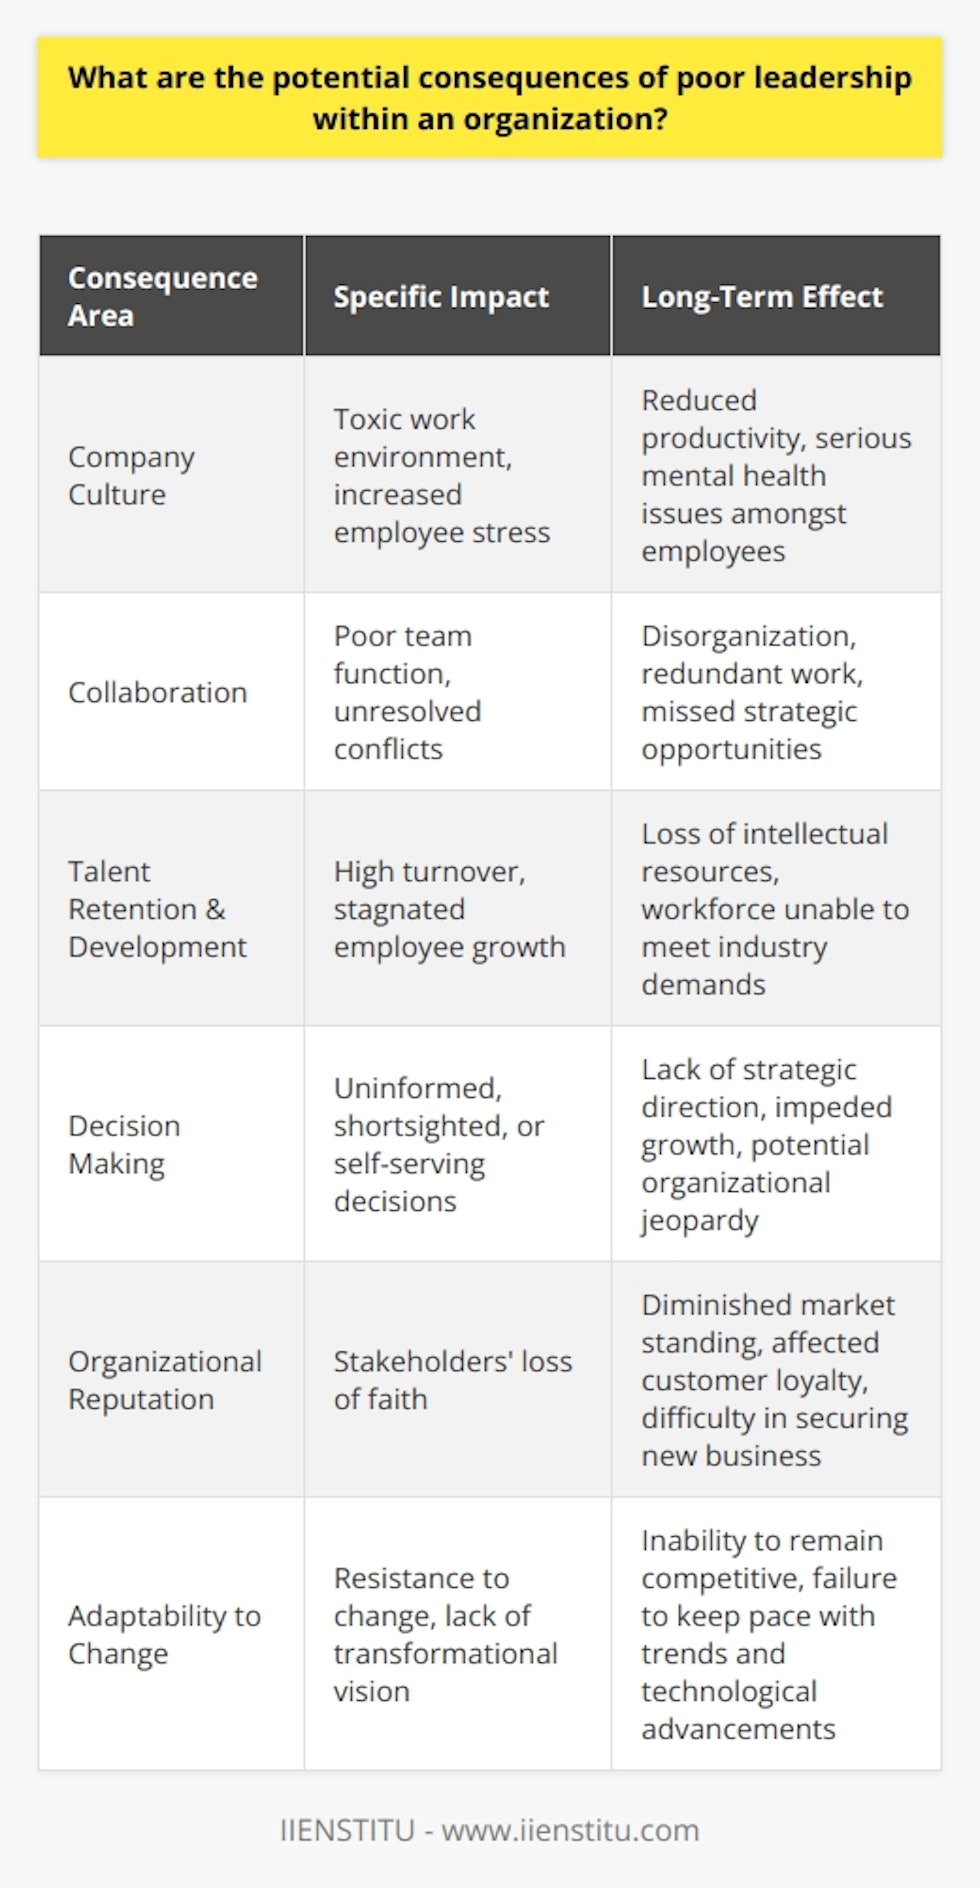 Poor leadership within an organization can have a myriad of negative effects that ripple throughout every aspect of the business. Often underestimated, the consequences of ineffective leadership can lead to long-term issues that may be difficult to reverse. Below is an exploration of the potential impact poor leadership has on an organization.**Deterioration of Company Culture**One of the most significant consequences of poor leadership is the erosion of a company's culture. Leaders set the tone for the work environment; if they are disengaged, lack empathy, or are unethical, these traits can permeate throughout the organization, leading to a toxic workplace culture. Employees working in a toxic environment may experience increased stress, which can exacerbate into serious mental health issues, thereby affecting their productivity and the company’s output.**Hindrances to Effective Collaboration**Without strong leadership, teams often struggle to function effectively. Poor leadership might manifest as a lack of clear direction, or as a failure to mediate and resolve conflicts. These issues disrupt teamwork, sabotage collaboration, and may prevent the alignment of individual efforts with organizational objectives. The ensuing disorganization can lead to redundant work, missed opportunities, and strategic missteps.**Obstacles to Talent Retention and Development**A great leader can attract and retain top talent. Conversely, poor leaders are often at the core of high turnover rates. Employees seek growth opportunities, and without proper mentorship and advocacy from their leaders, their development stagnates. Such stagnation not only depletes the organization's intellectual resources but also leads to a workforce that is unable to evolve with industry demands.**Degradation of Decision Making**Decision-making is at the heart of leadership. Poor leaders make decisions that are either uninformed, shortsighted, or self-serving. This can lead to a lack of strategic direction for the organization, impede growth, and in severe cases, jeopardize the organization's survival. Decisions made in isolation without diverse input can also alienate staff and stifle the potential for innovative problem-solving.**Impaired Organizational Reputation**The effects of poor leadership extend beyond internal operations; they can also damage an organization's external reputation. If stakeholders recognize prevalent leadership issues, it may undermine their faith in the organization's capability and reliability. This can weaken an organization’s standing in the market, affect customer loyalty, and make it more difficult to secure new business or partnerships.**Strained Relationship with Change**Today’s fast-paced business environment requires agility and the ability to embrace change. Poor leaders are typically resistant to change and may lack the vision to steer the organization through transformative periods. This resistance can hinder the organization's ability to remain competitive, responsive to new trends, and apt to capitalize on technological advancements.**Conclusion**The reverberating impact of poor leadership is profound and far-reaching, affecting all dimensions of an organization. The key to mitigating these consequences lies in recognizing the vital role leaders play in the health and success of a business. For organizations invested in achieving excellence, addressing leadership deficiencies proactively becomes not just an administrative concern, but a strategic imperative.